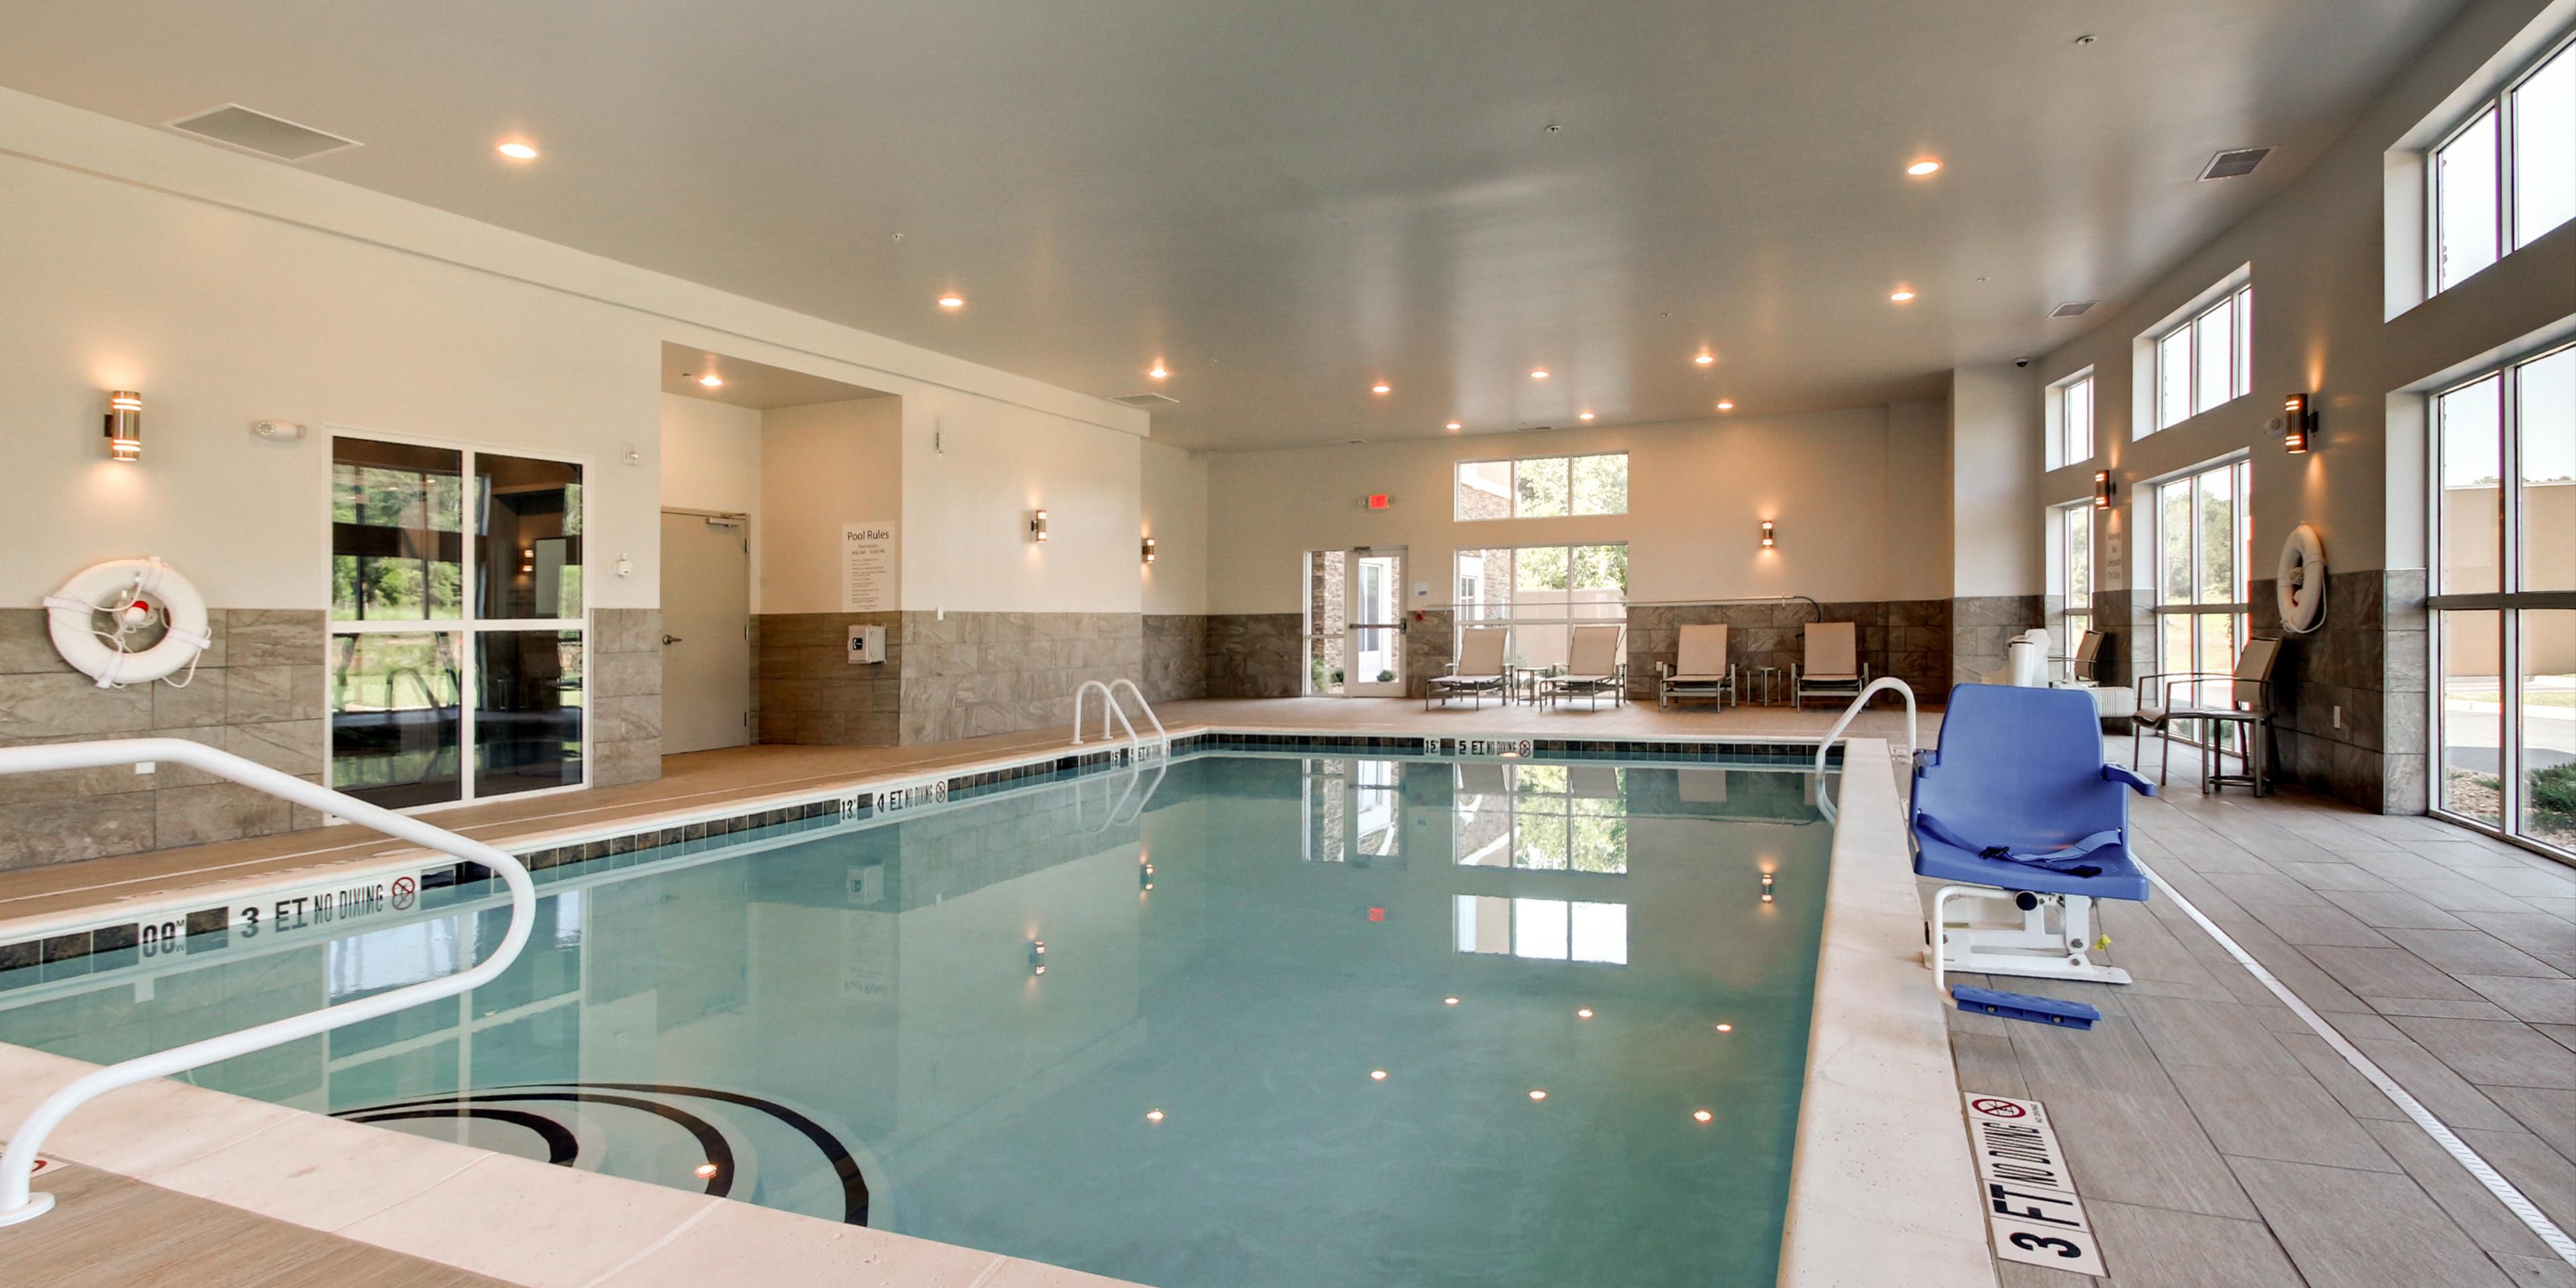 When you stay with us you will be able to enjoy our year round indoor heated pool.  What a great way to relax after a busy day of traveling!